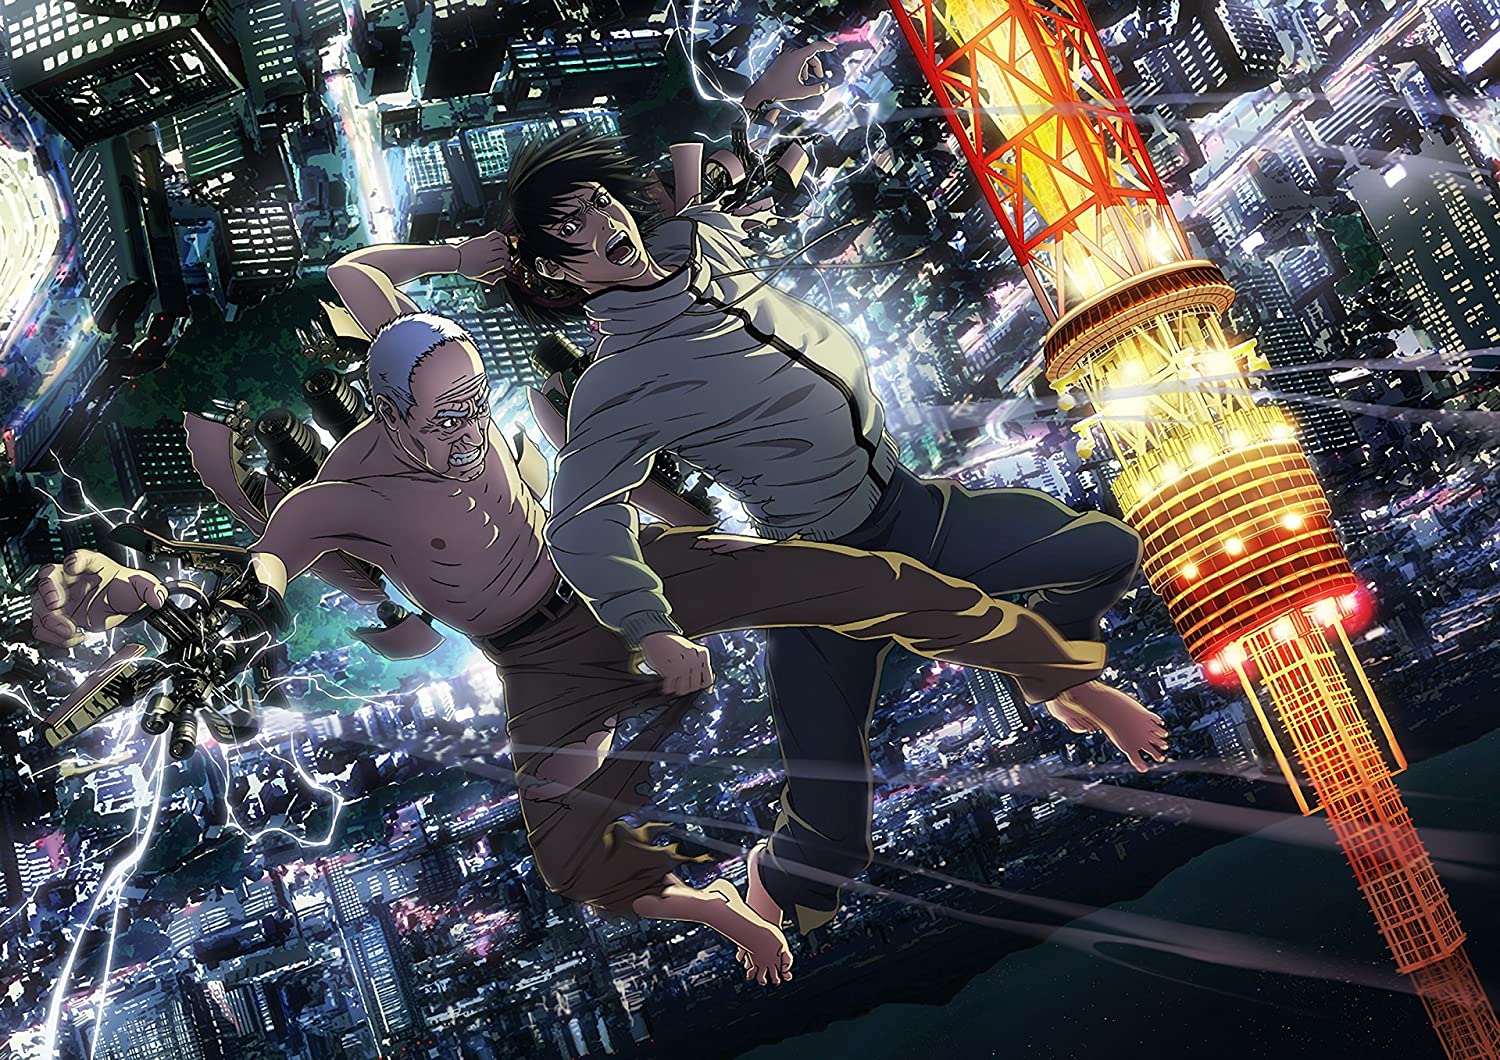 Getting weird with it: Inuyashiki